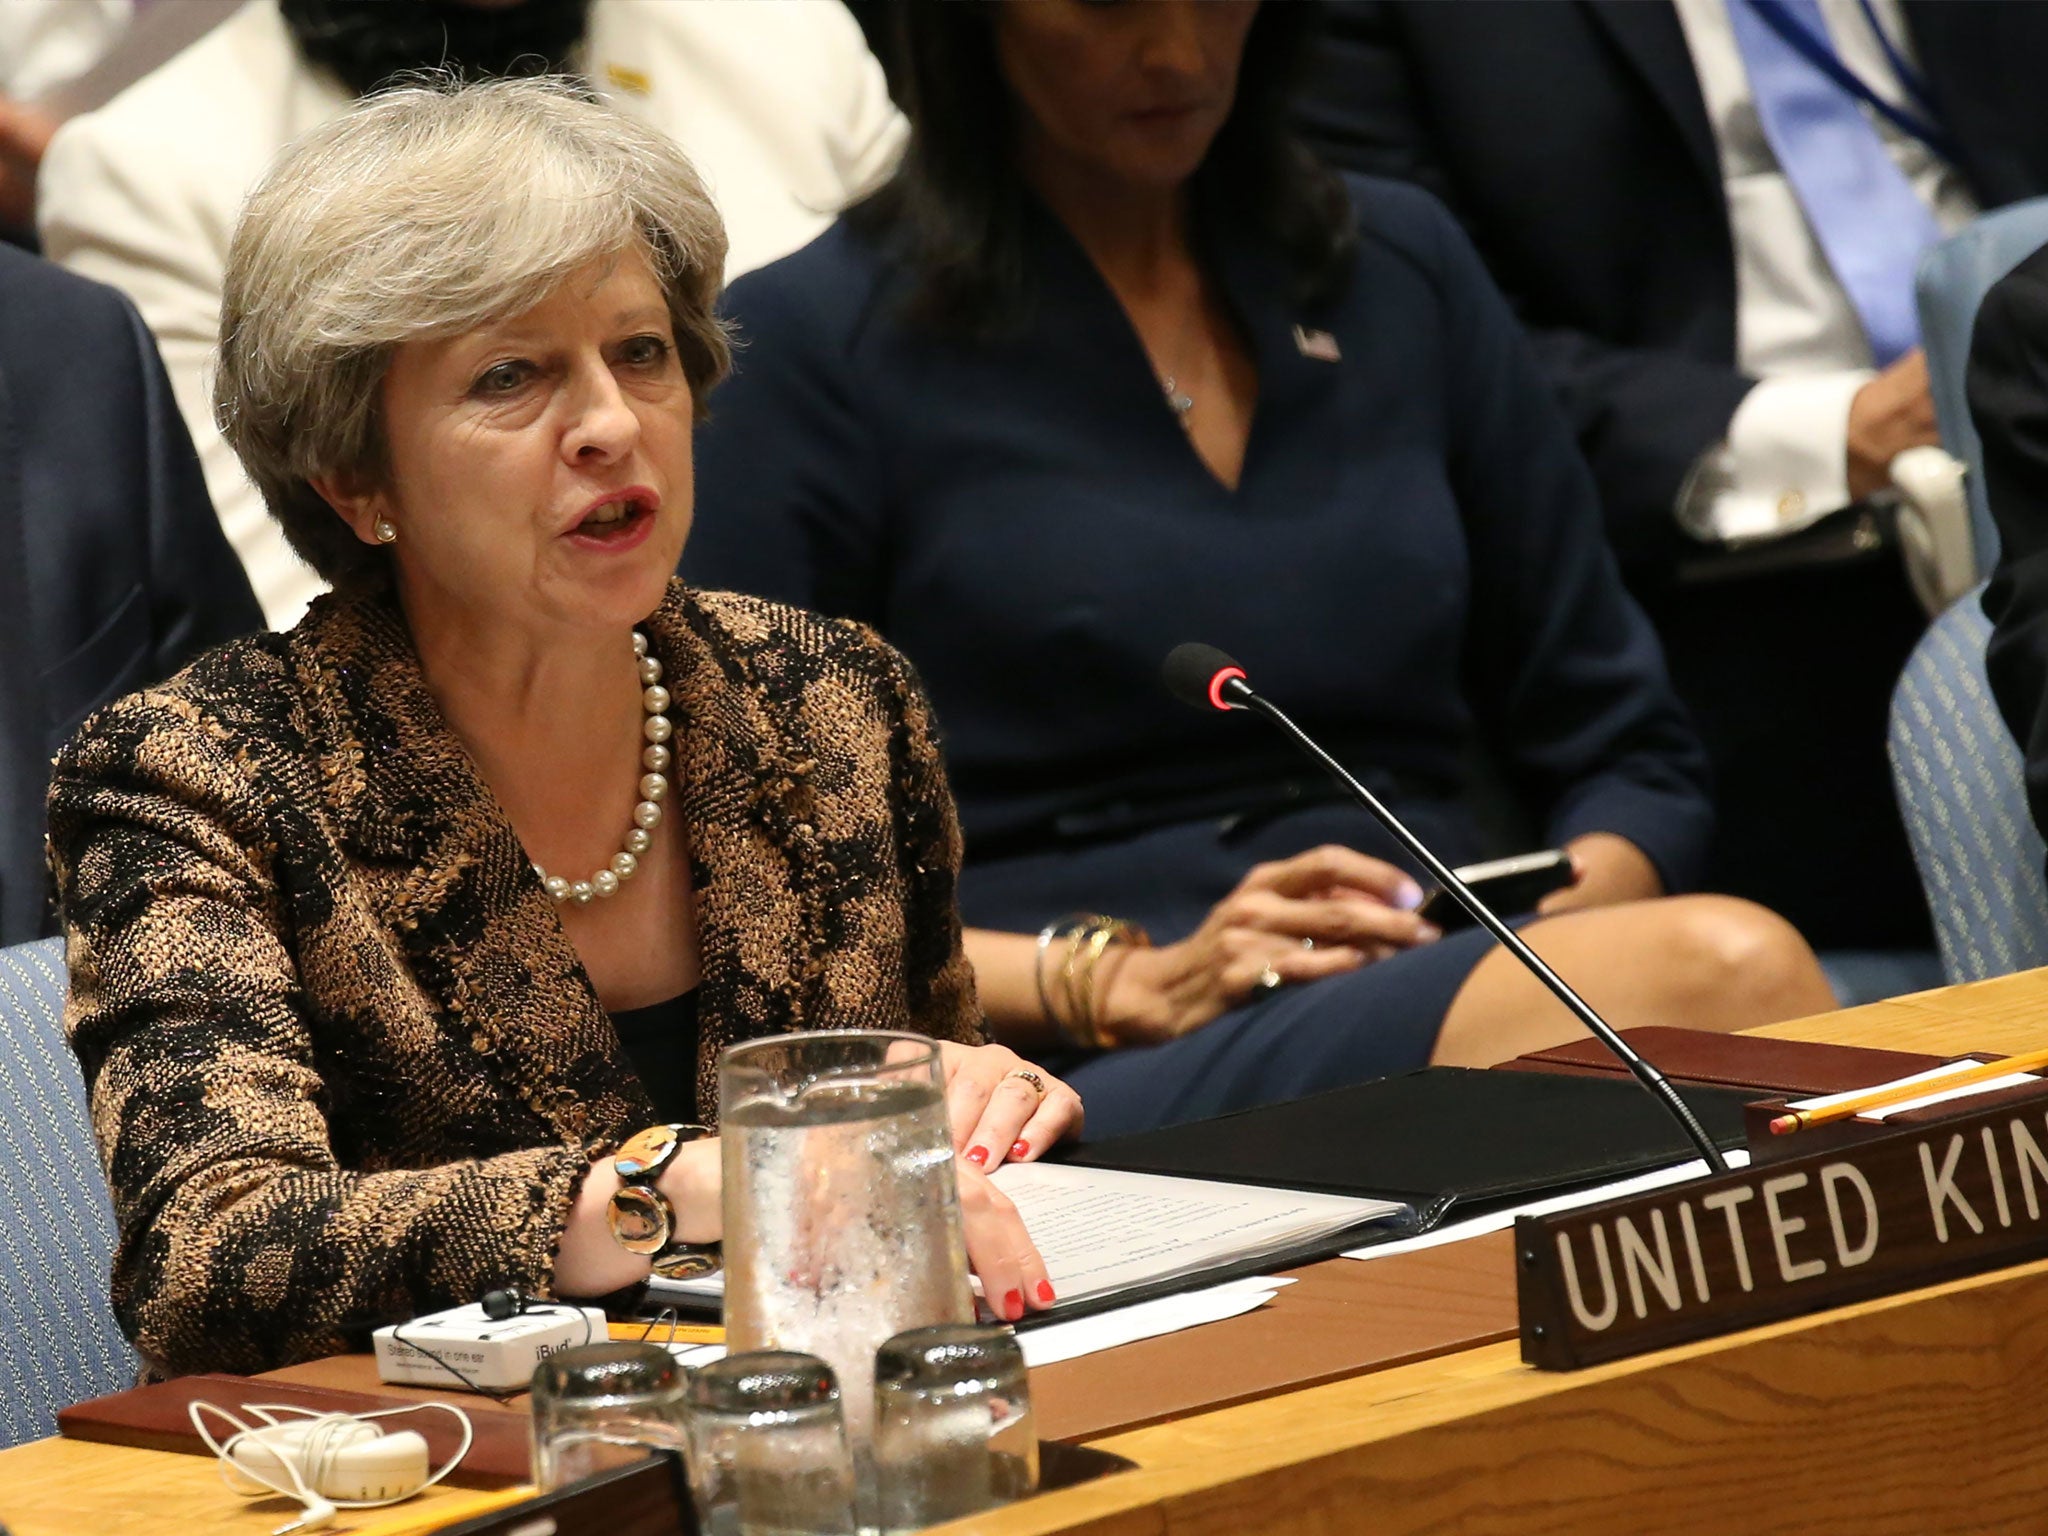 Theresa May  speaks during a Security Council Meeting on United Nations peacekeeping operations, ahead of her keynote speech to the assembly